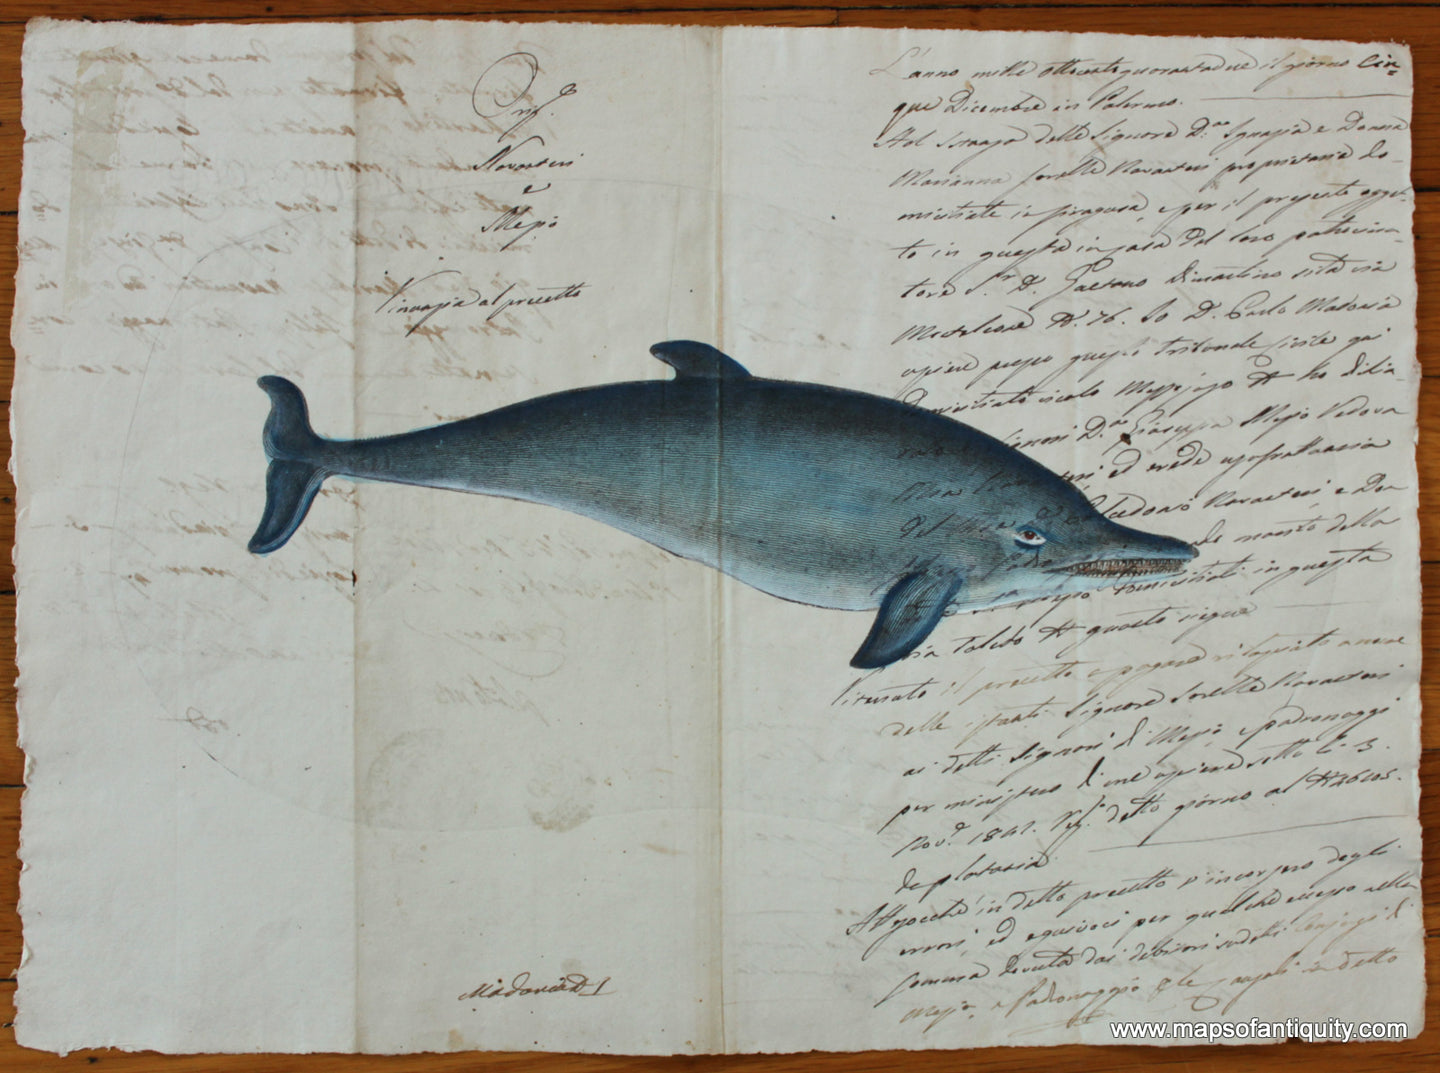 Specialty-Reproduction-Dolphin-(Reproduction-on-Antique-Paper)-Digitally-Engraved-Specialty-Reproduction---Reproduction-Maps-Of-Antiquity